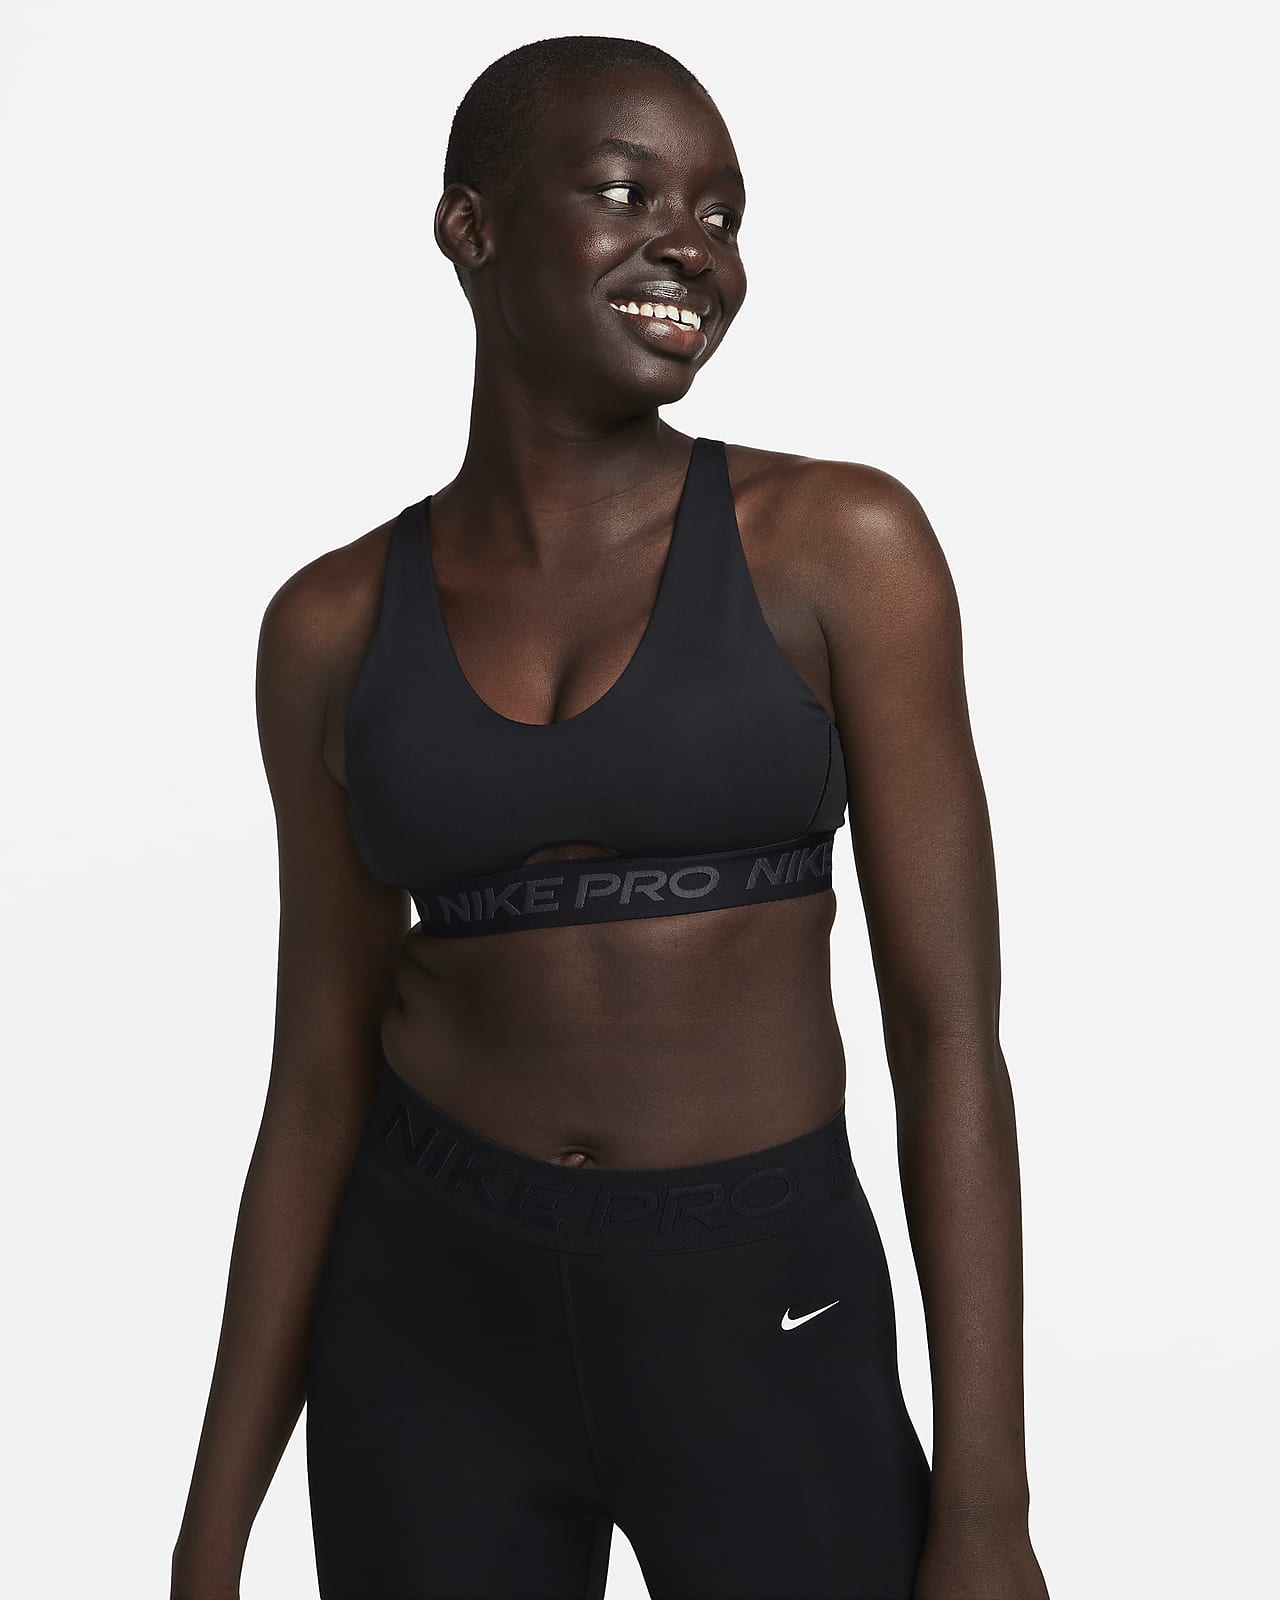 Nike Pro Indy Womens Sports Bra - Tops - Fitness Clothing